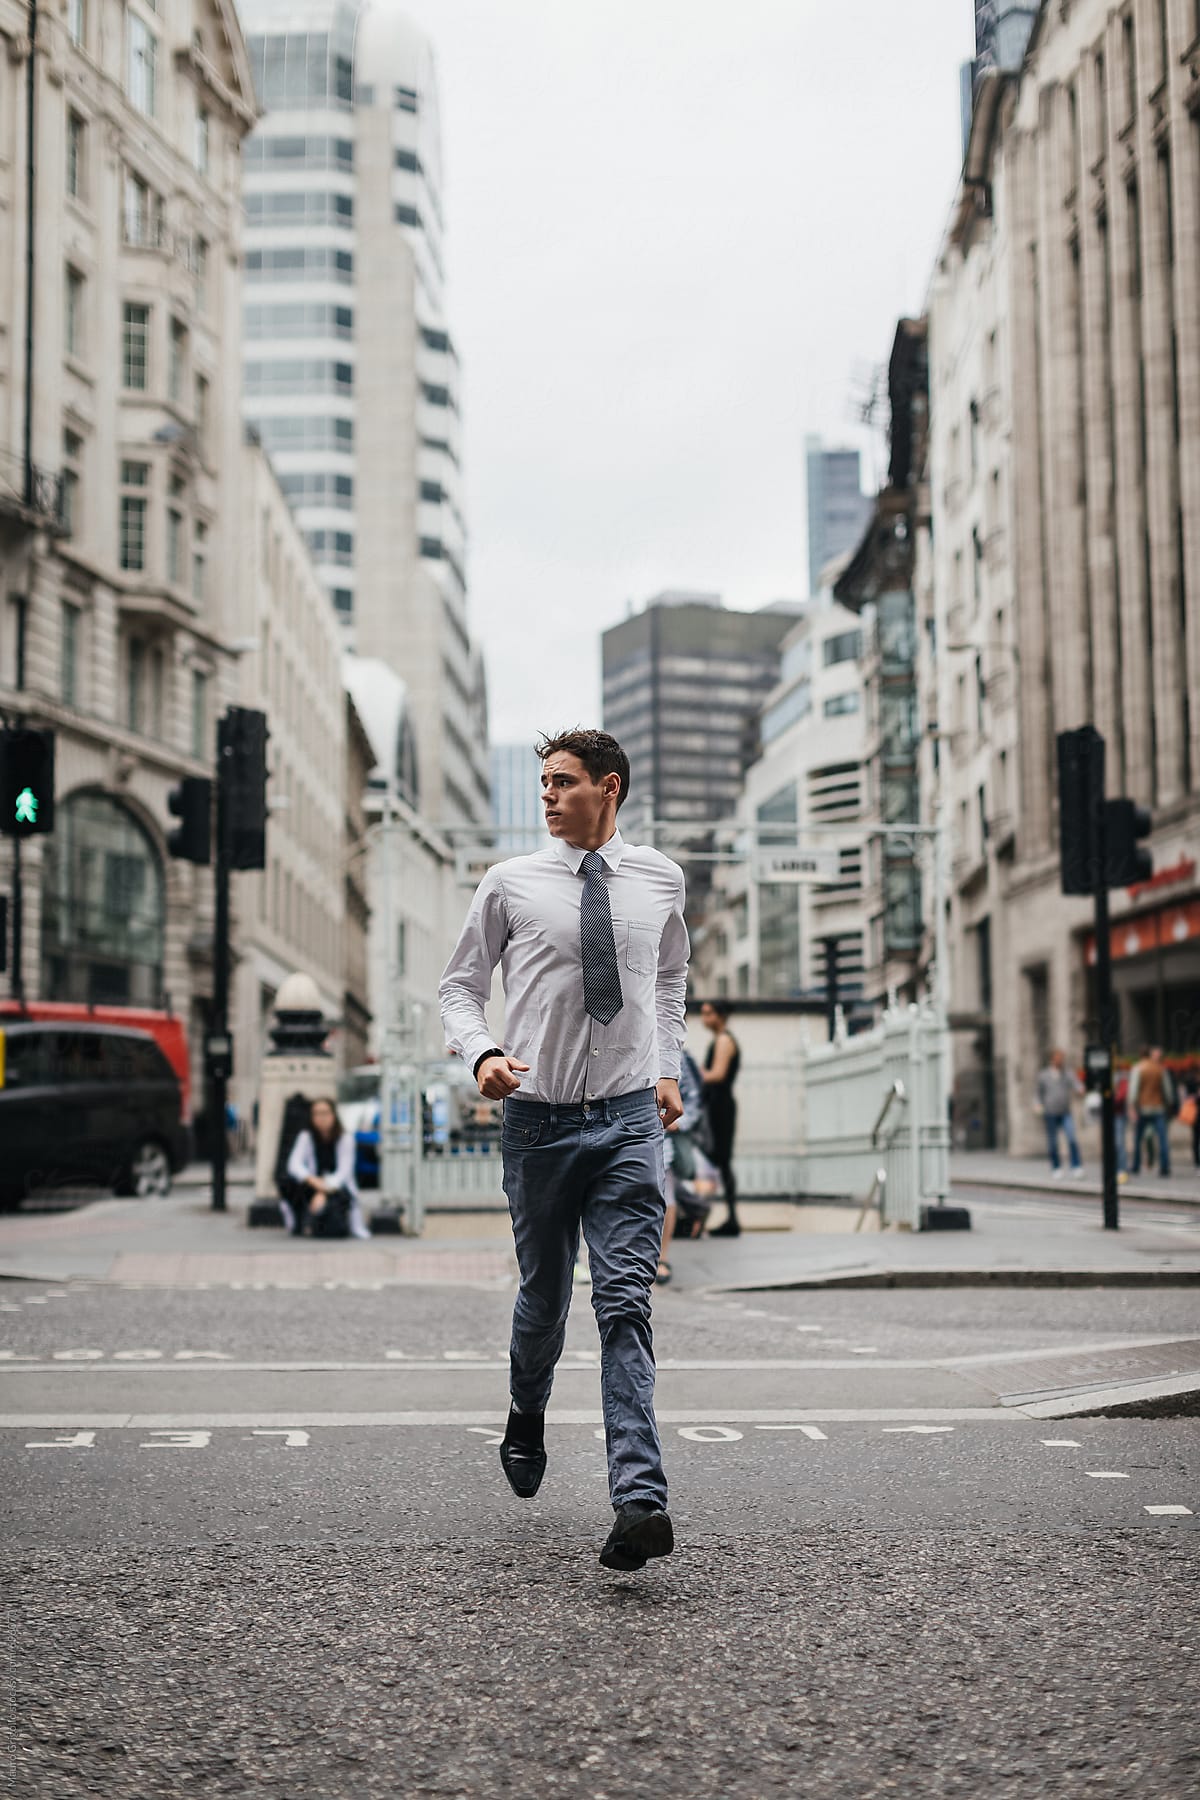 Businessman cross the street in a financial district